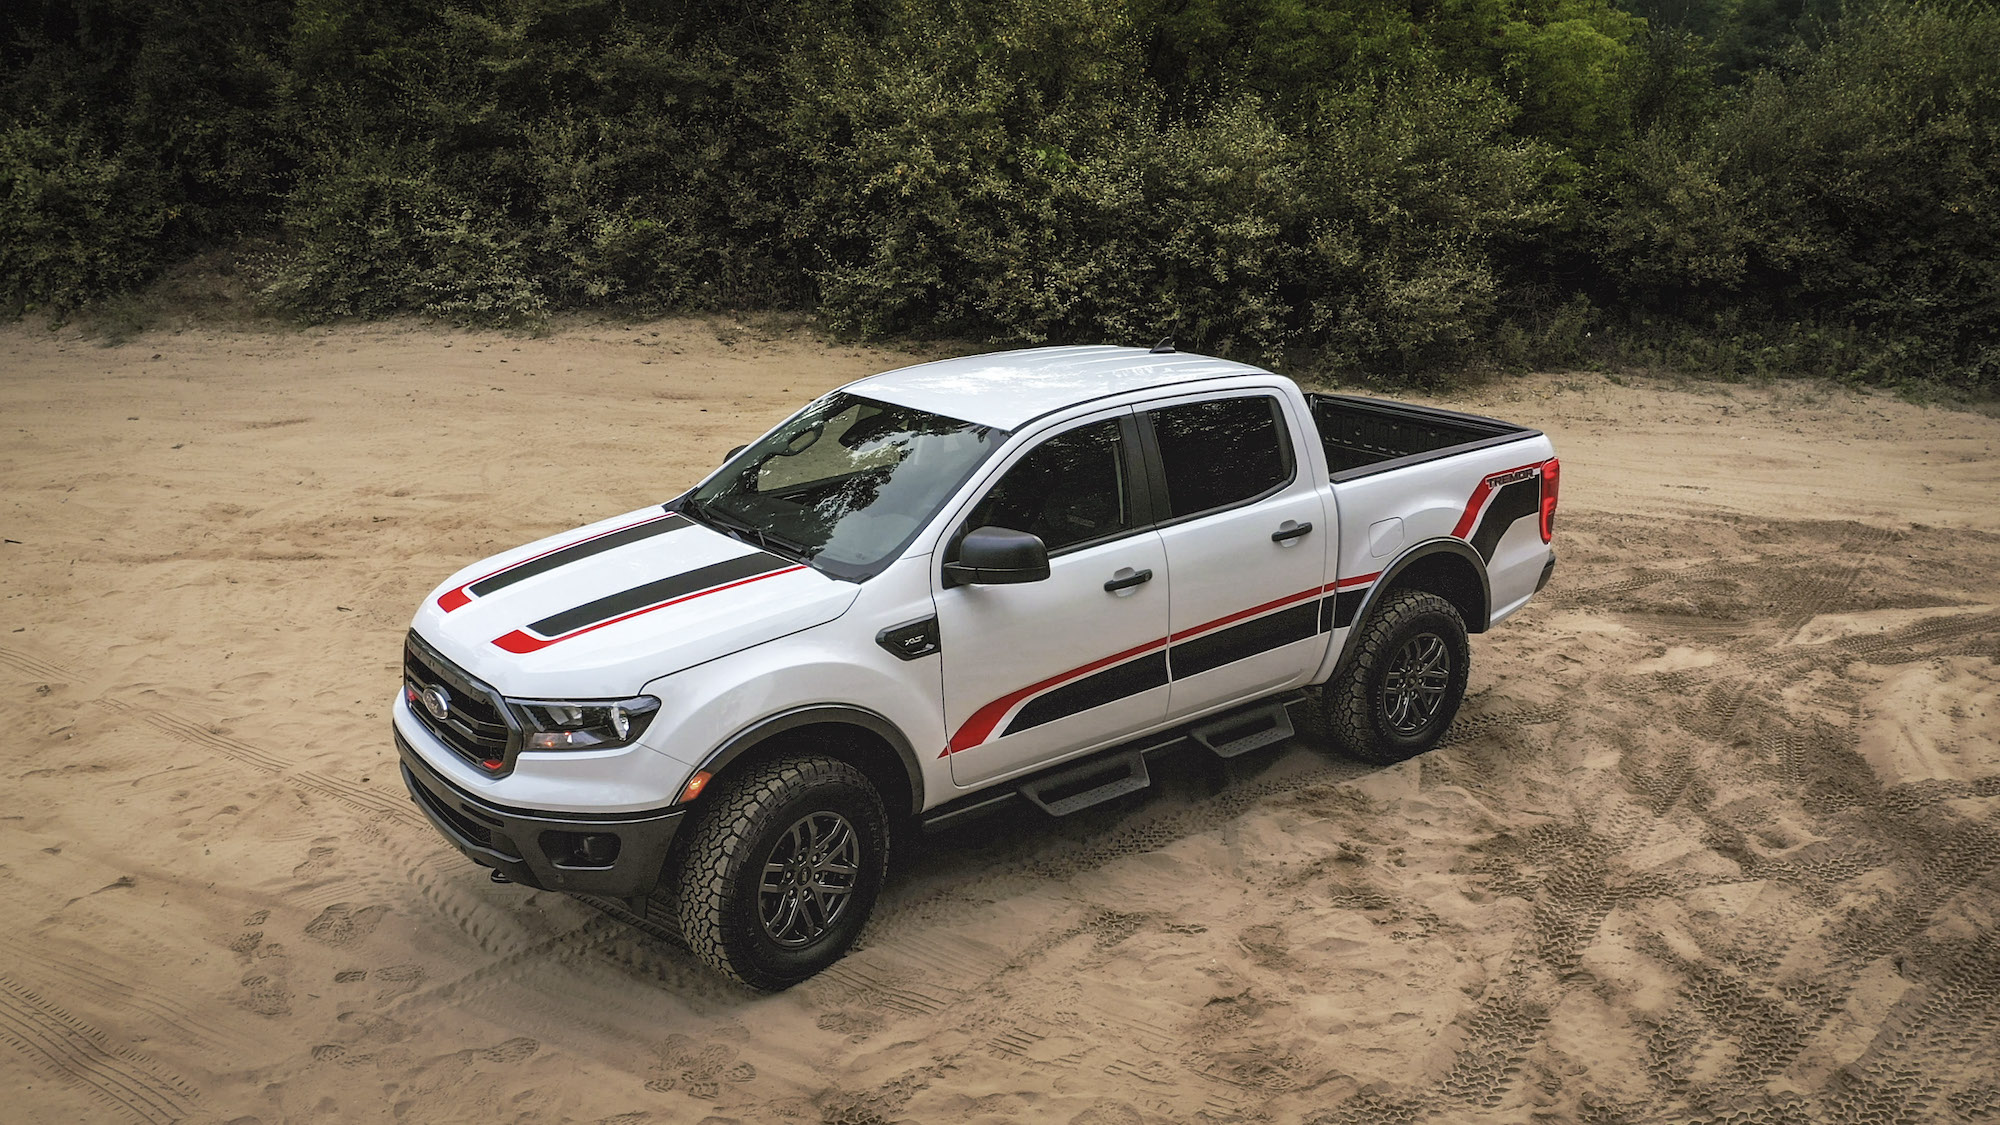 A white 2021 Ford Ranger Tremor XLT off-road pickup truck with black and red sticker details